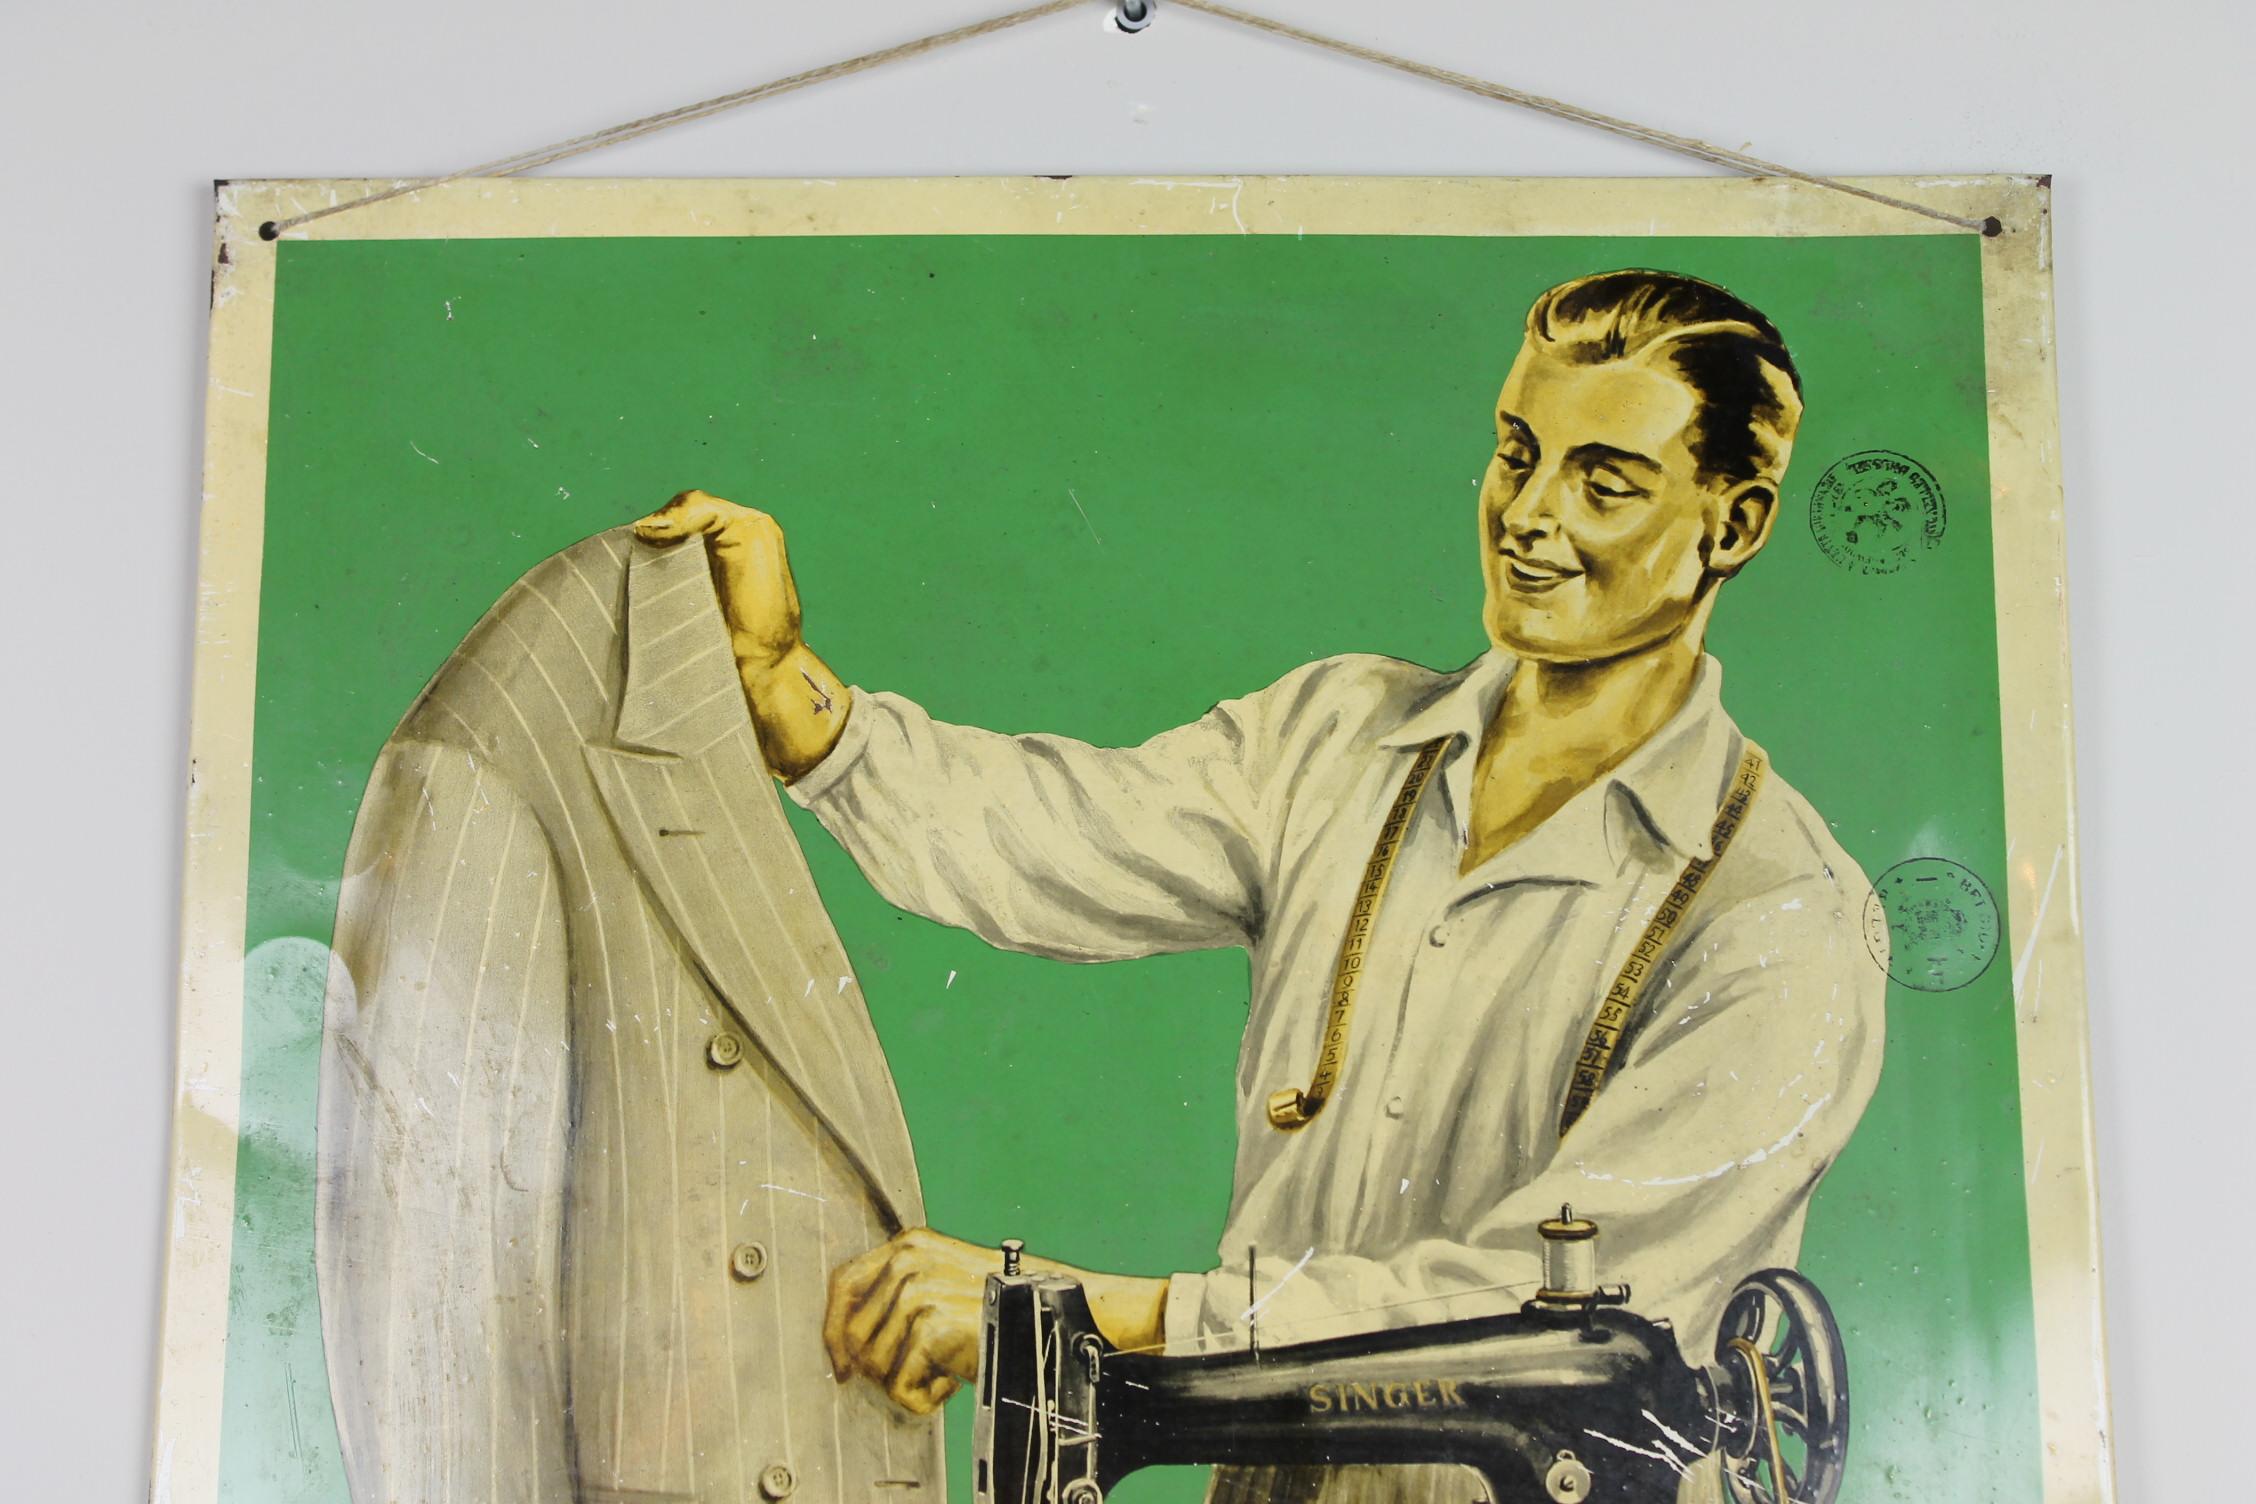 1930s Tin Advertising Sign for Singer Sewing Machines. 
This Advertising Display Sign has a design of a tailor behind his Singer Sewing Machine , 
making a Men's Suit. 

This Sign is not a porcelain sign or enamel sign, but a Tin Sign and also very